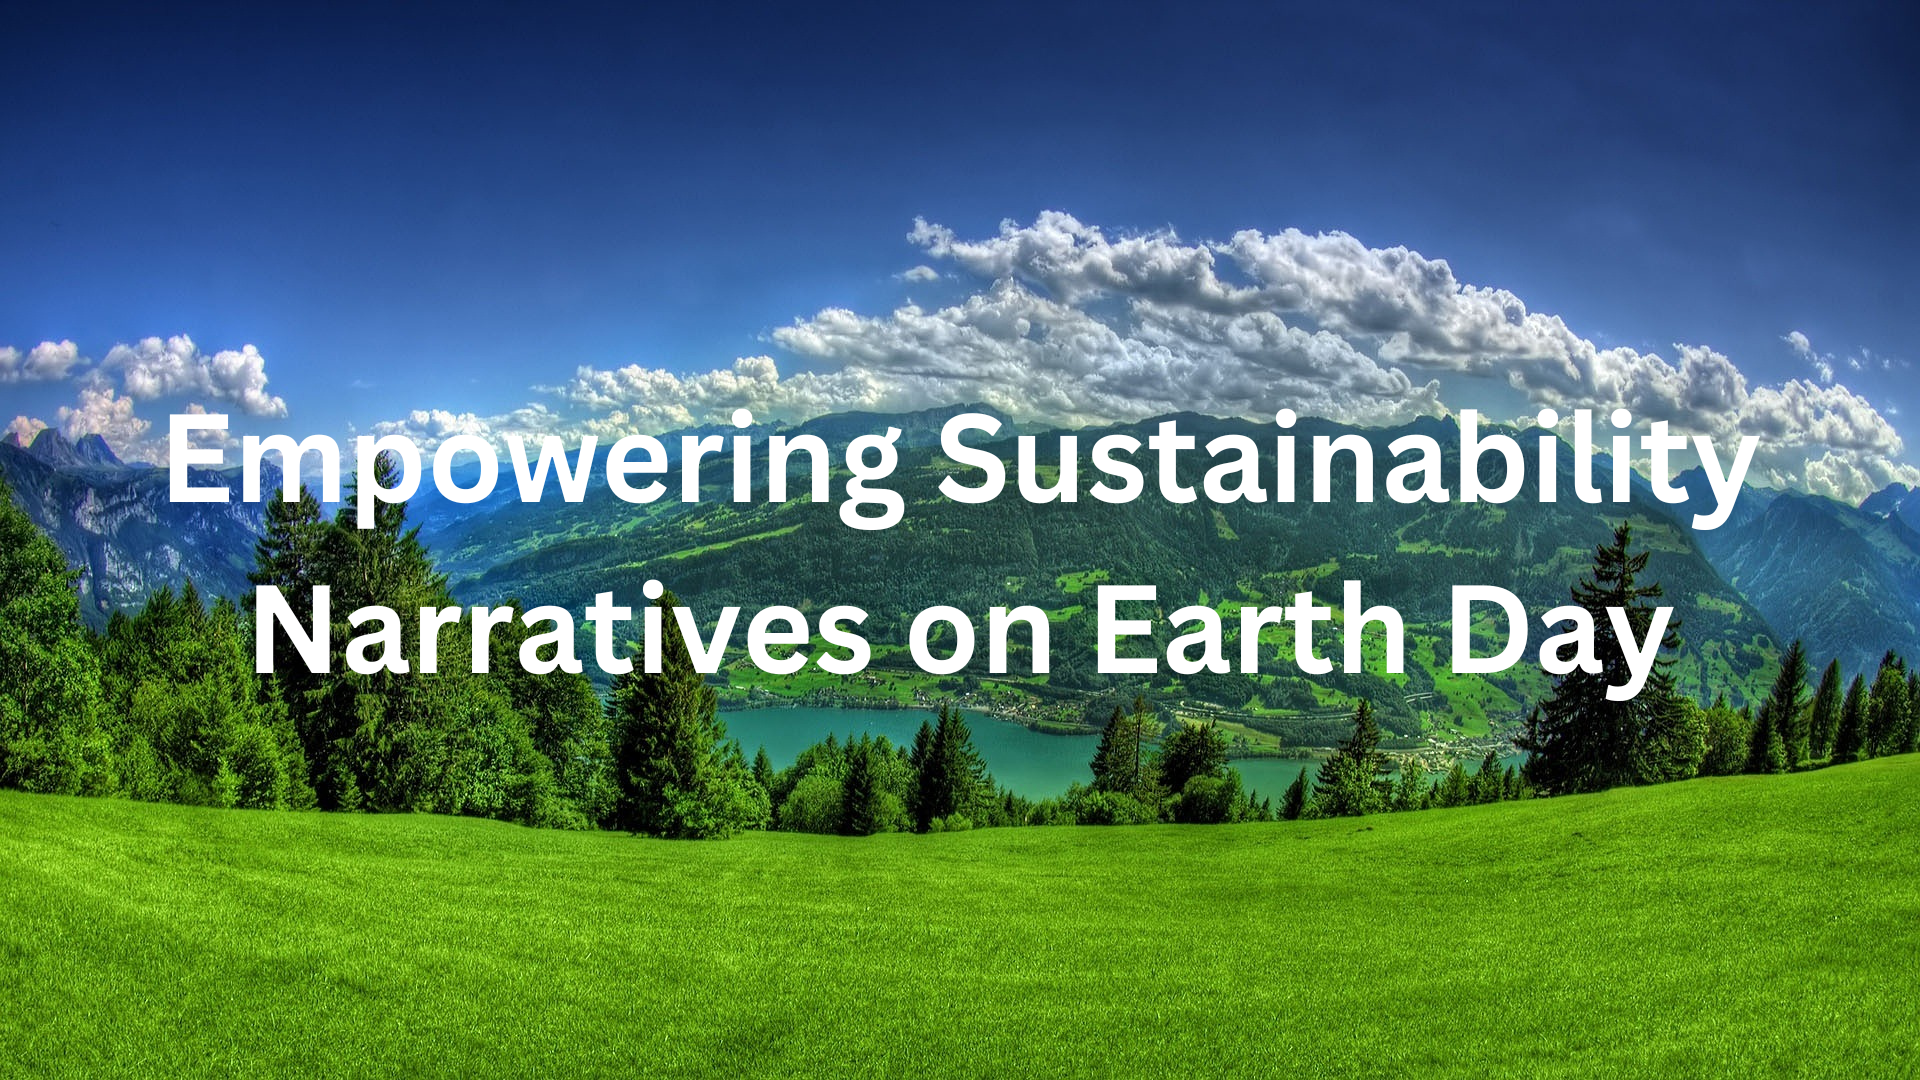 A scenic background of a lush green field lined with tall trees and a cloud-filled blue sky with the text "empowering sustainability narratives on Earth Day" written in white text over the photo.